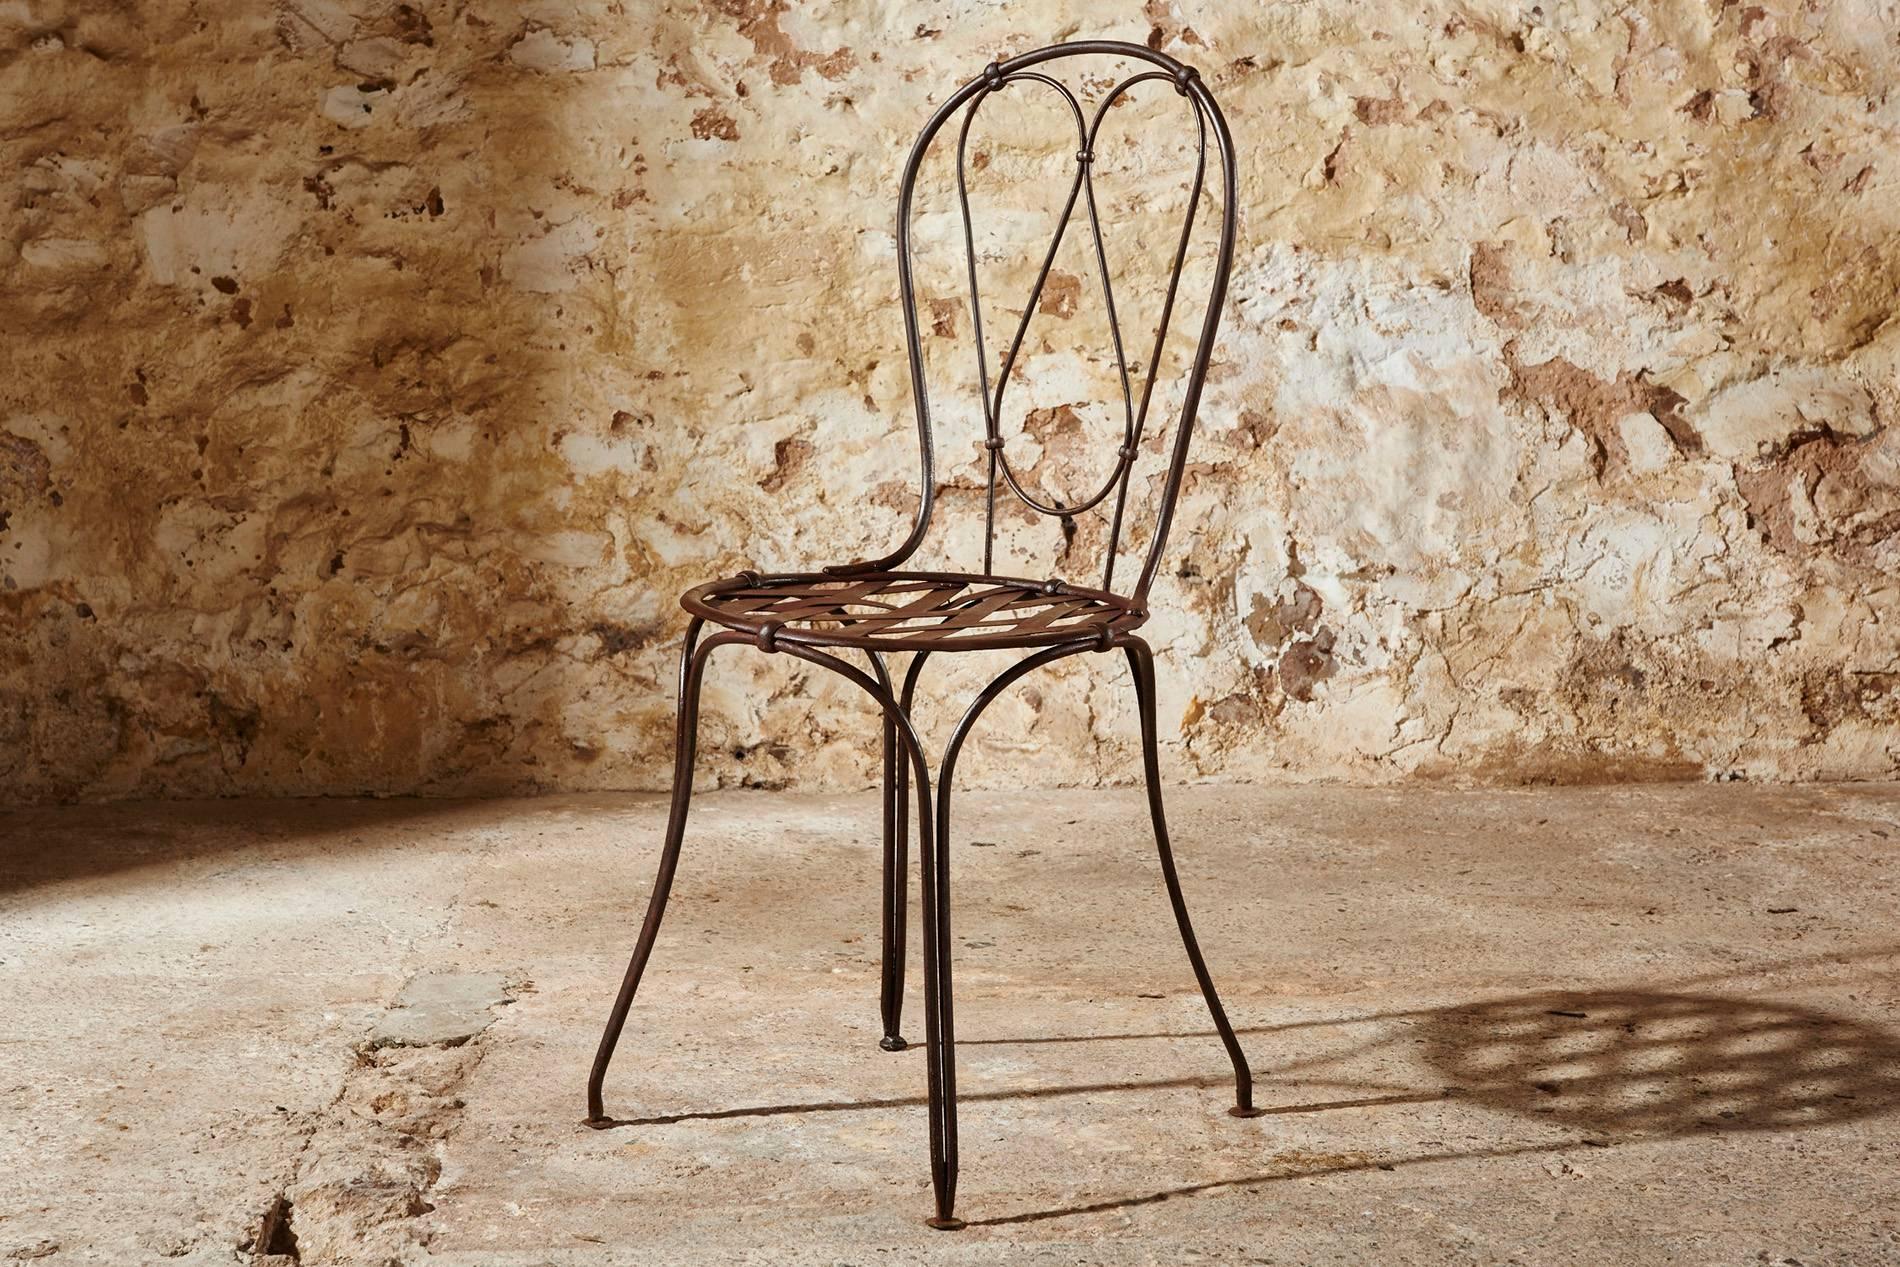 It is very unusual to find a set of ten matching 19th century garden chairs in their original hazelnut brown patina.

They are typically riveted together as manufactured before welding was widely introduced. They have a hand-forged wrought iron